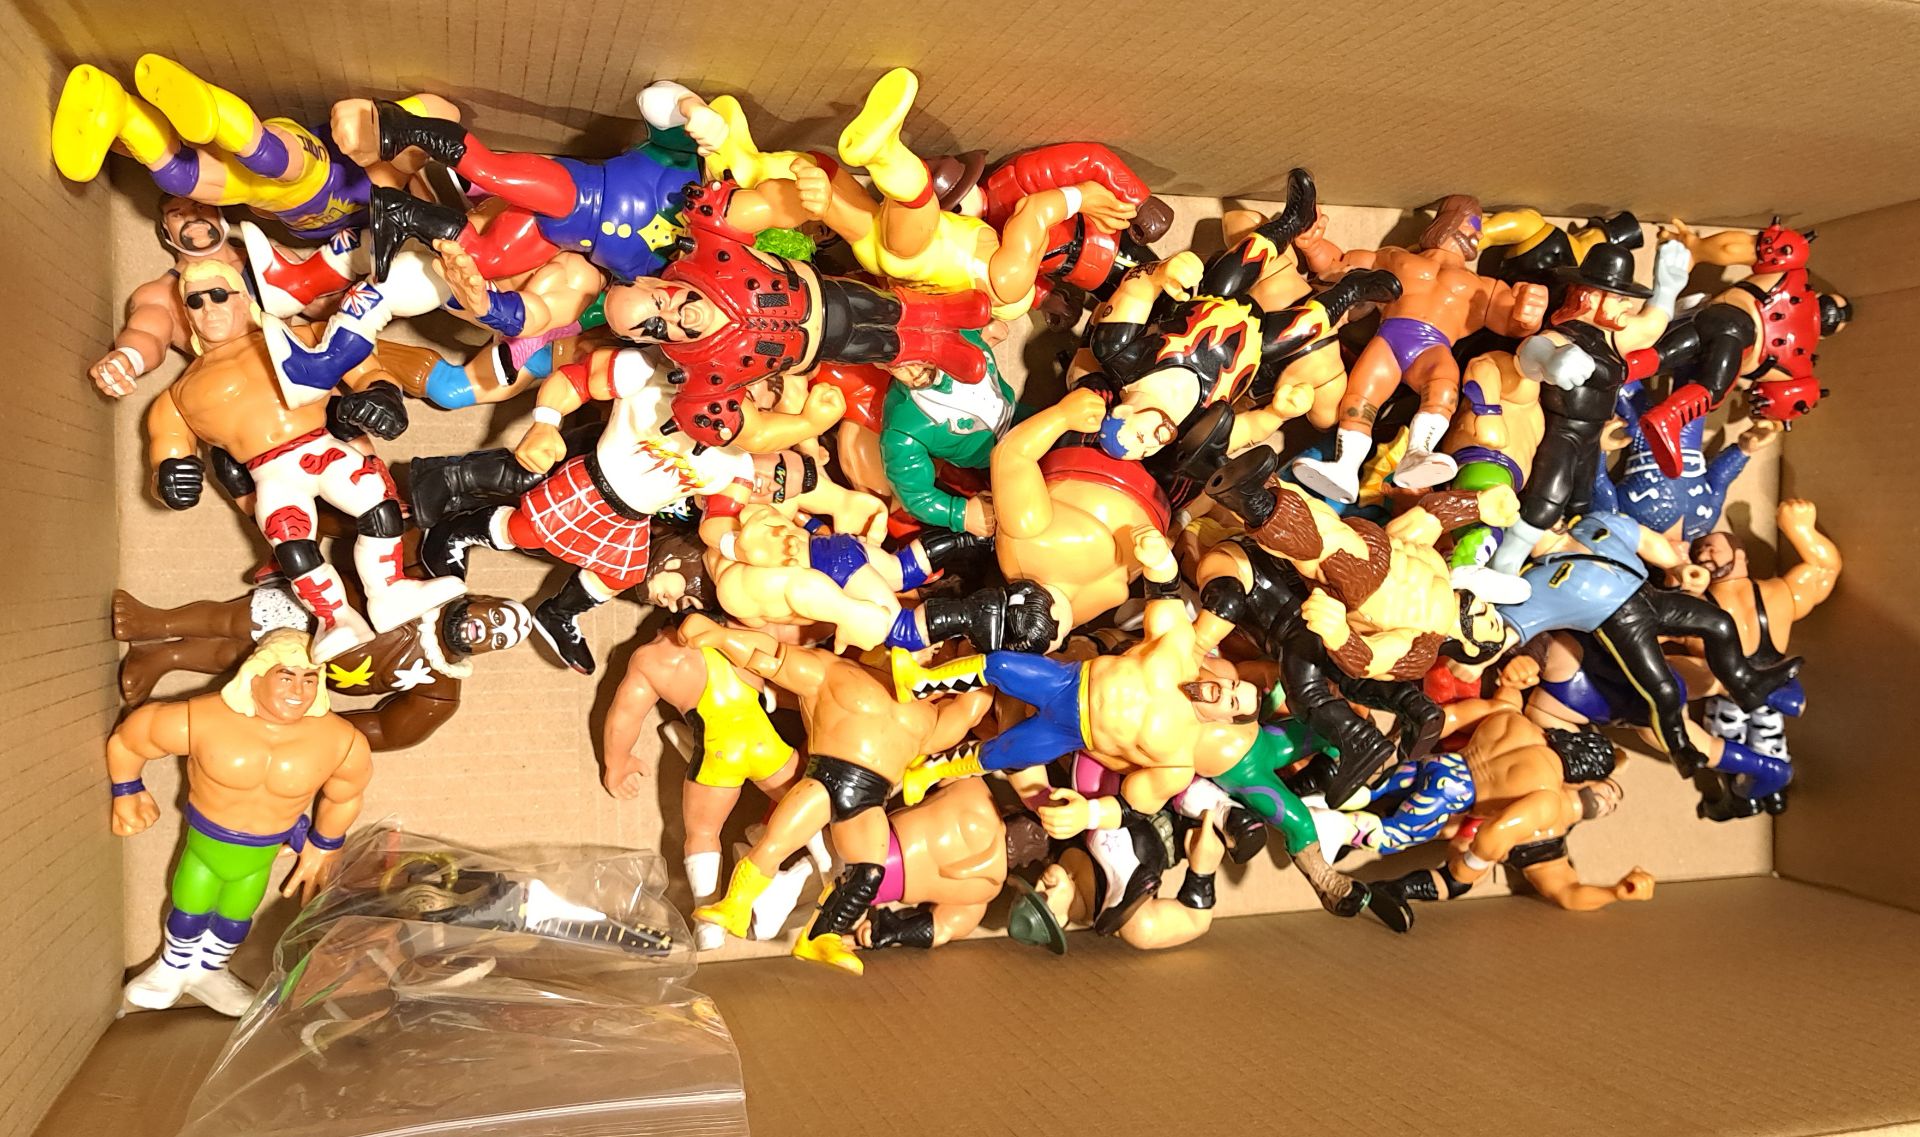 Quantity of Loose WWF Action Figures